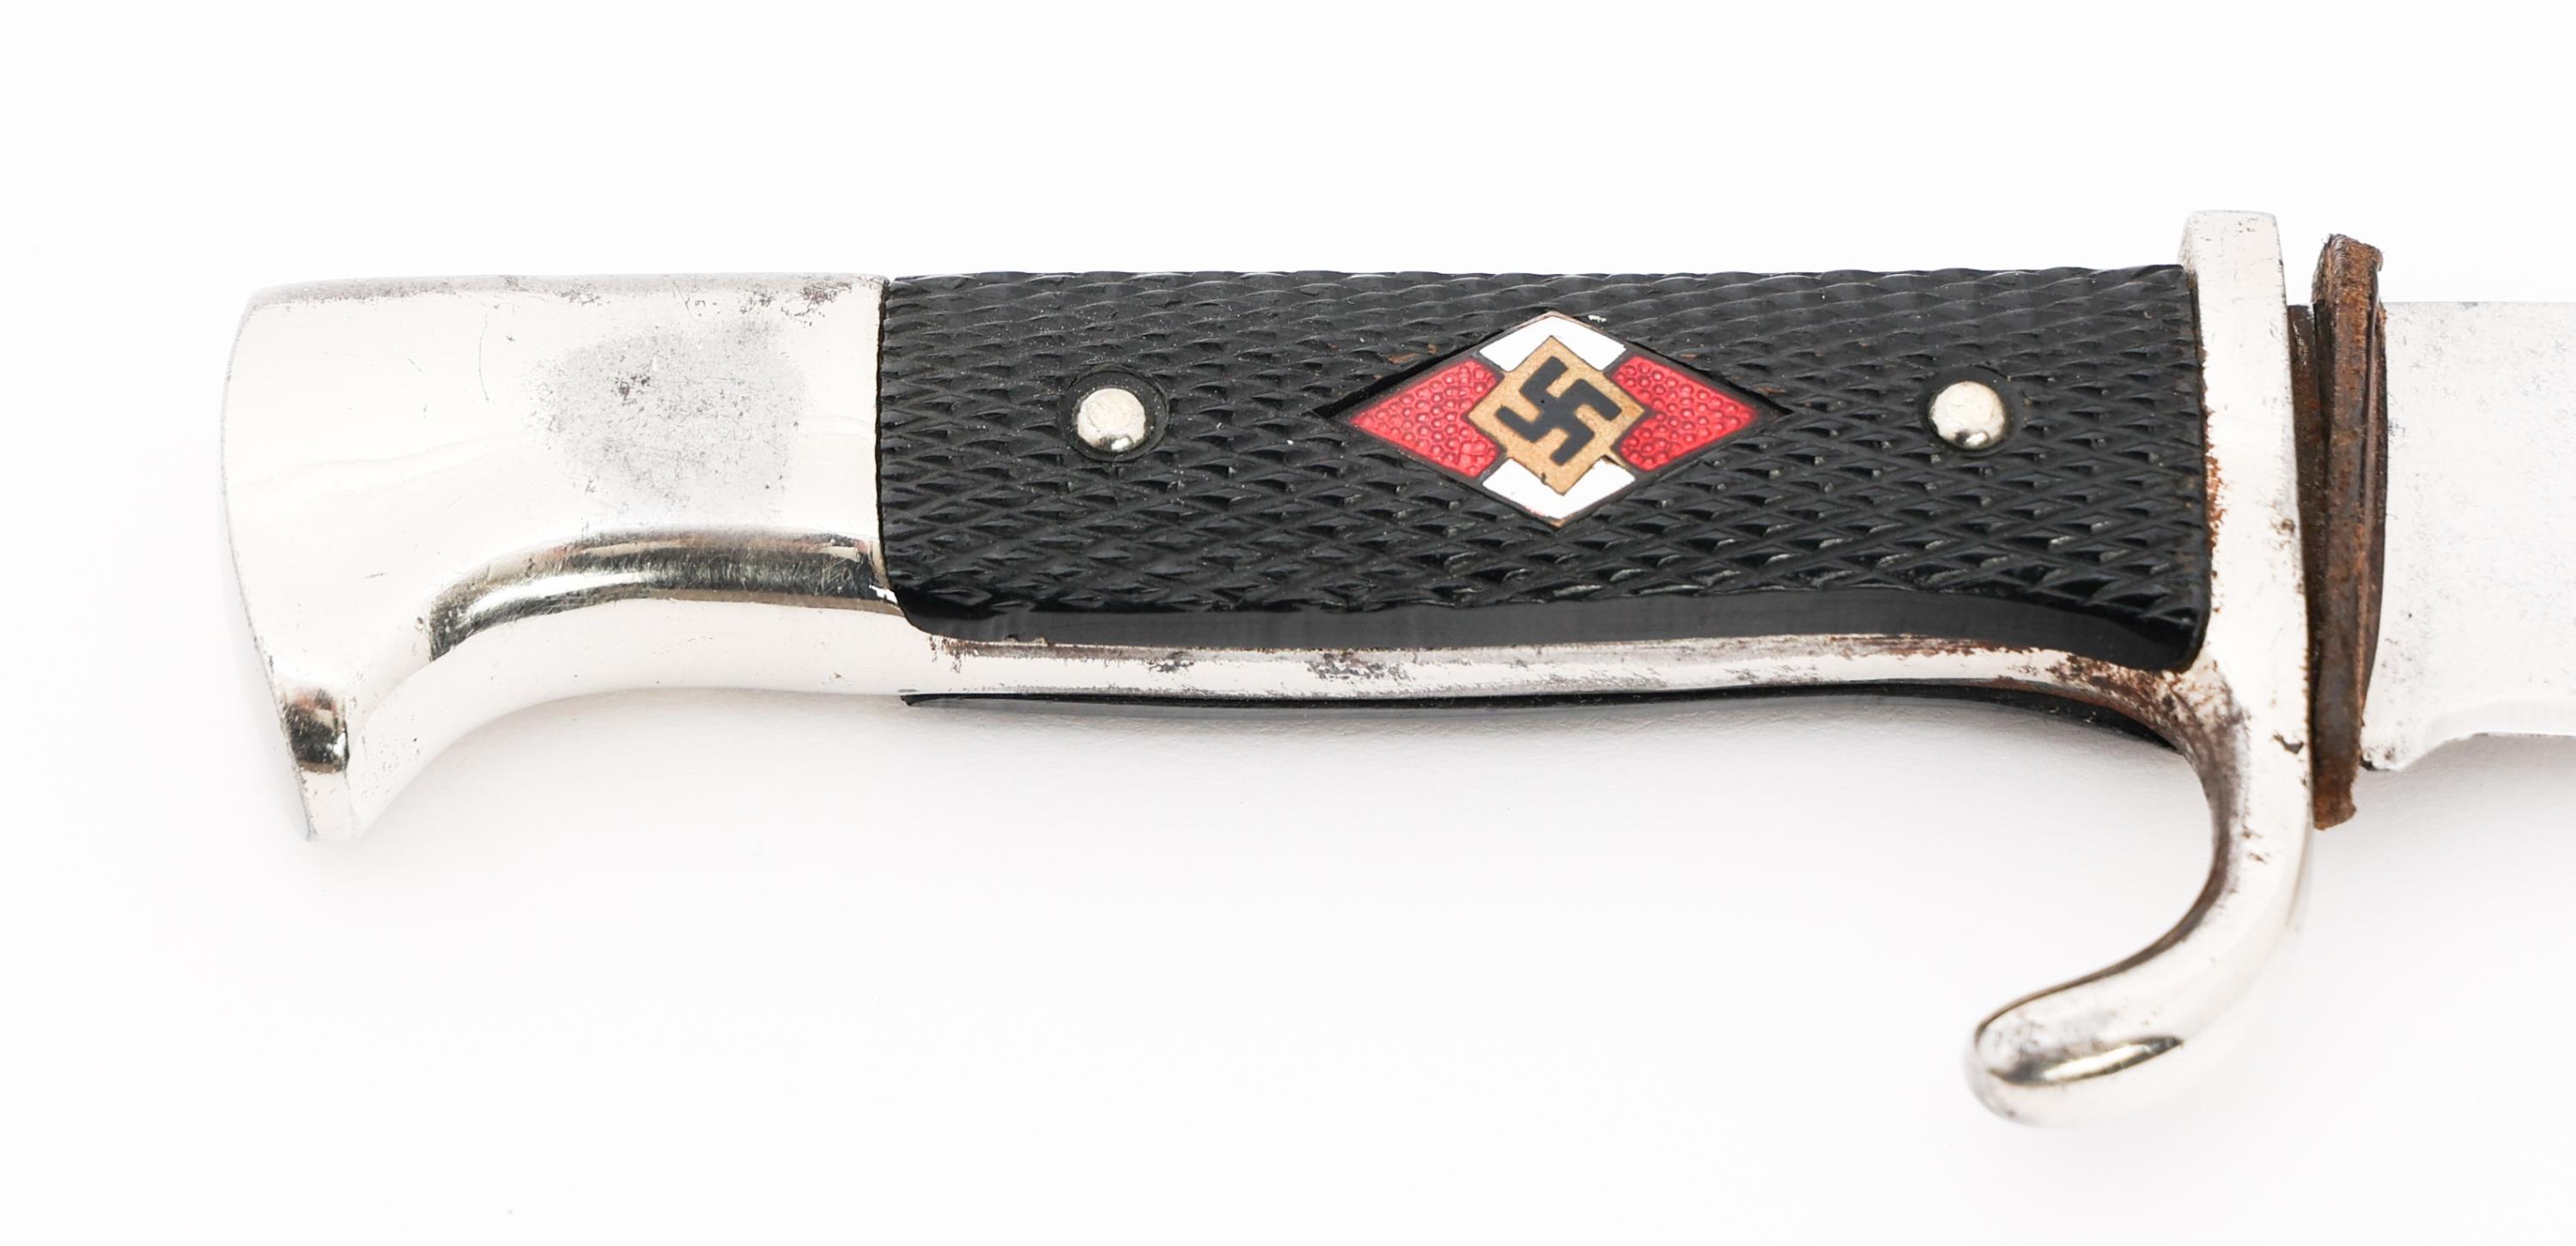 WWII GERMAN HITLER YOUTH KNIFE - MOTTO by EICKHORN